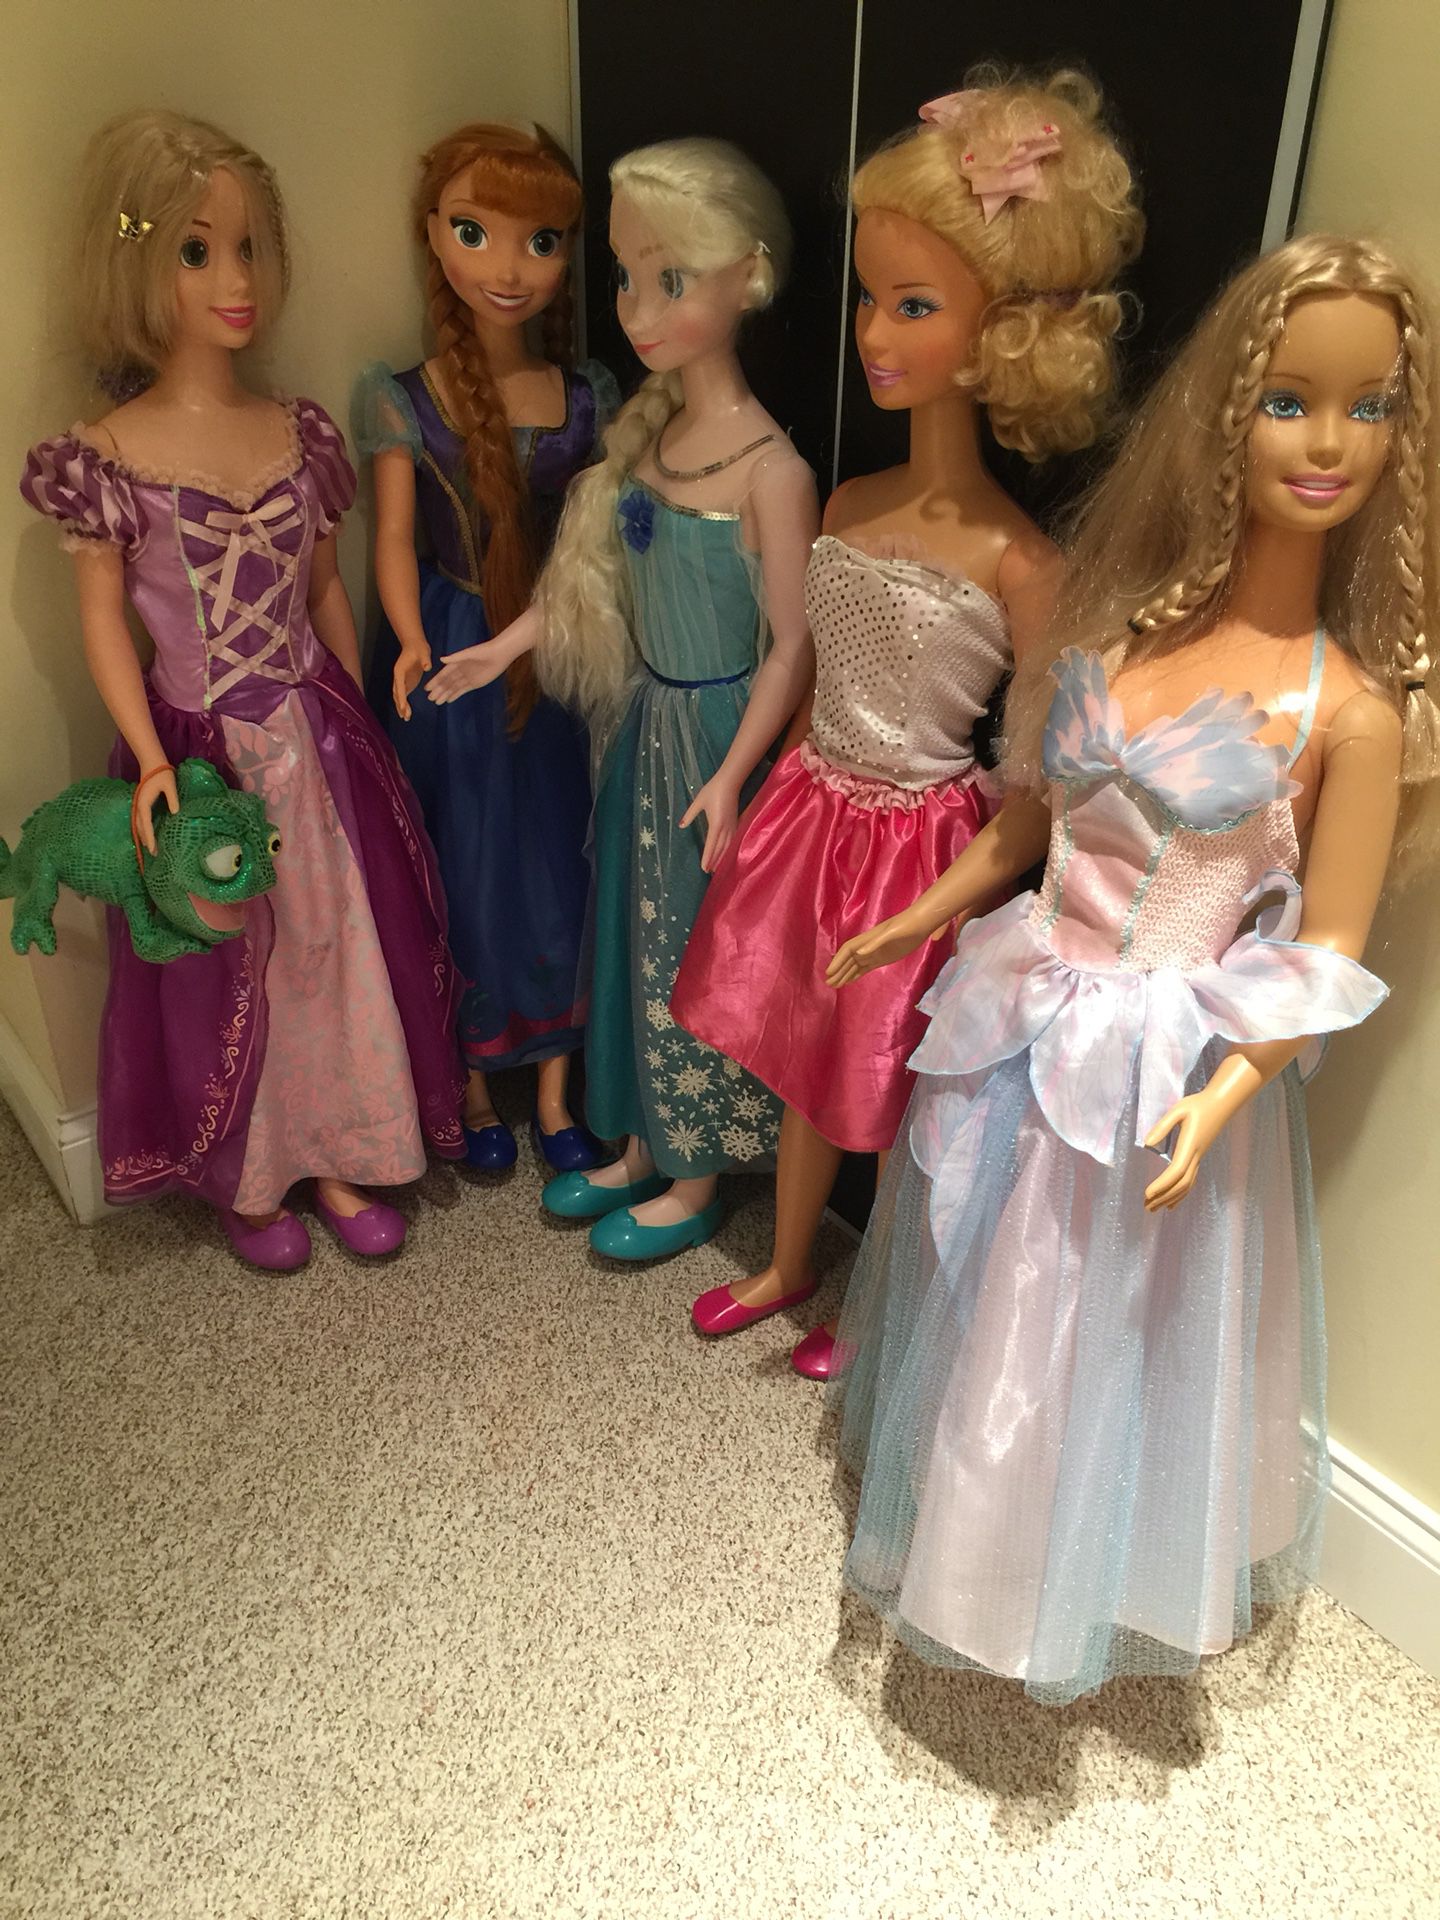 LIFE SIZE BARBIE DOLLS 3-4 FT PRINCESS REPUNZLE SWAN LAKE ELSA for Sale in Trumbull, CT - OfferUp